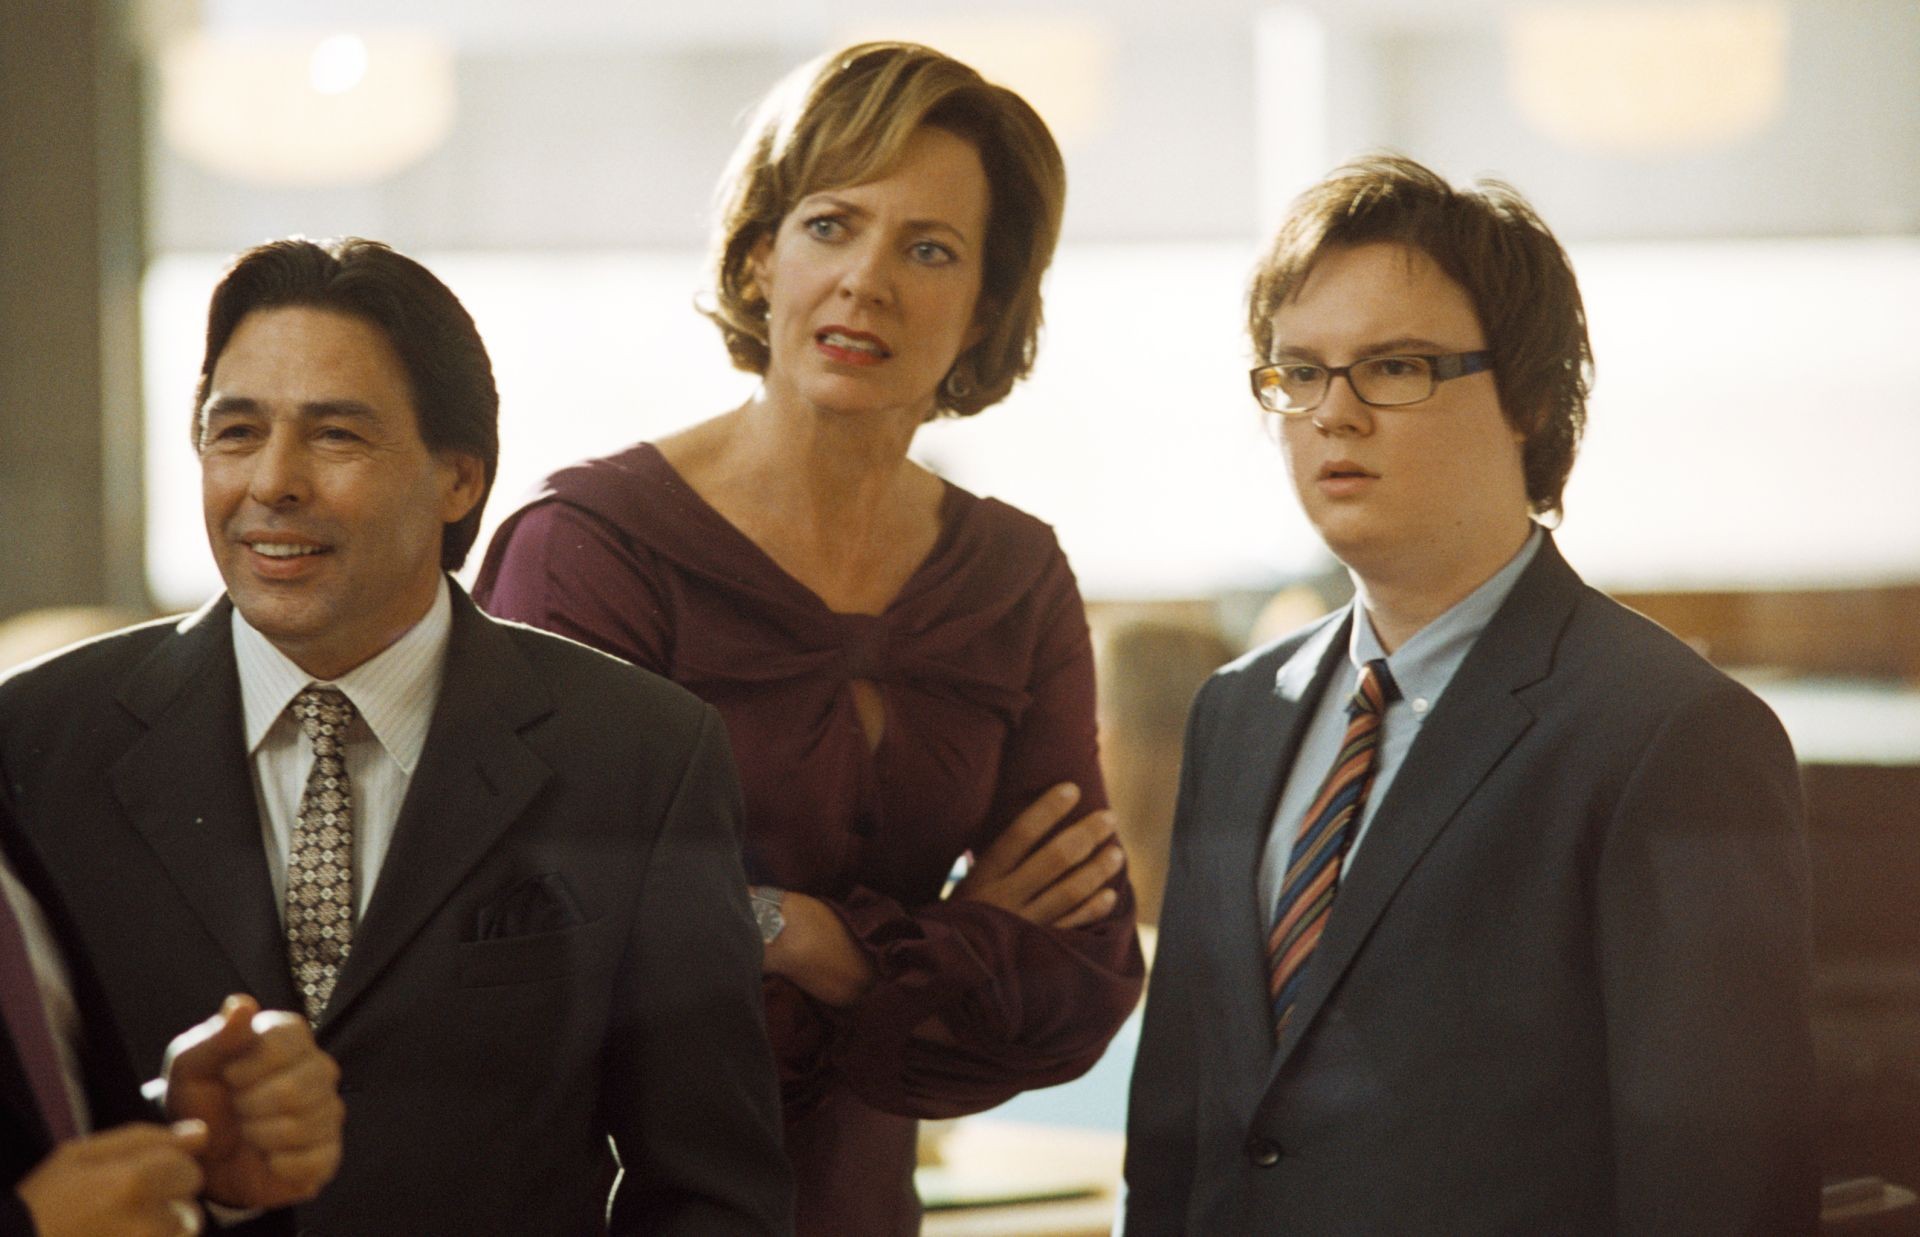 Allison Janney stars as Samantha Davis and Clark Duke stars as Aaron Wiseberger in DreamWorks SKG's A Thousand Words (2012). Photo credit by Bruce McBroom.